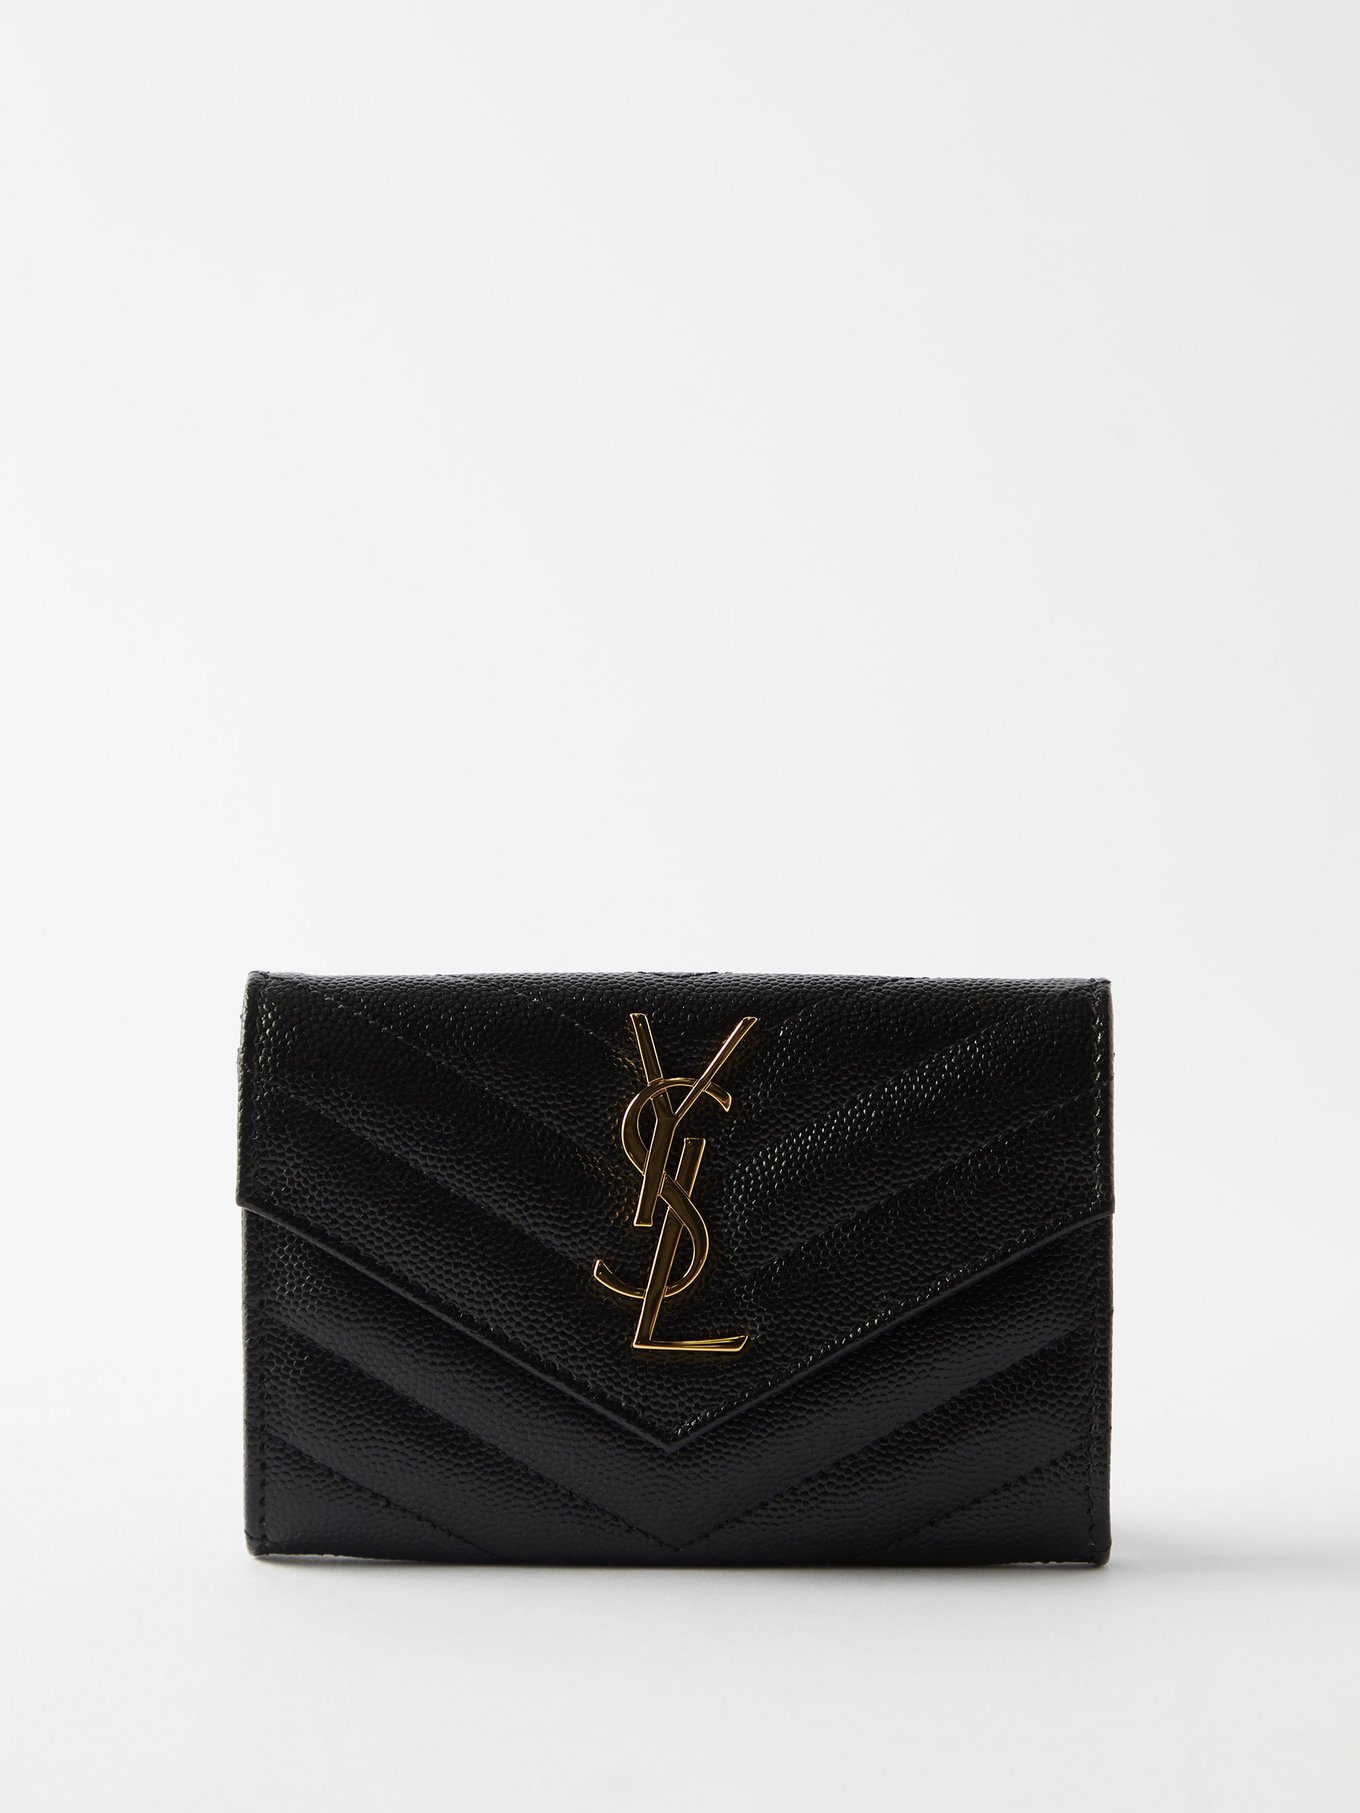 YSL Saint Laurent Small Quilted Black Leather Envelope Wallet On